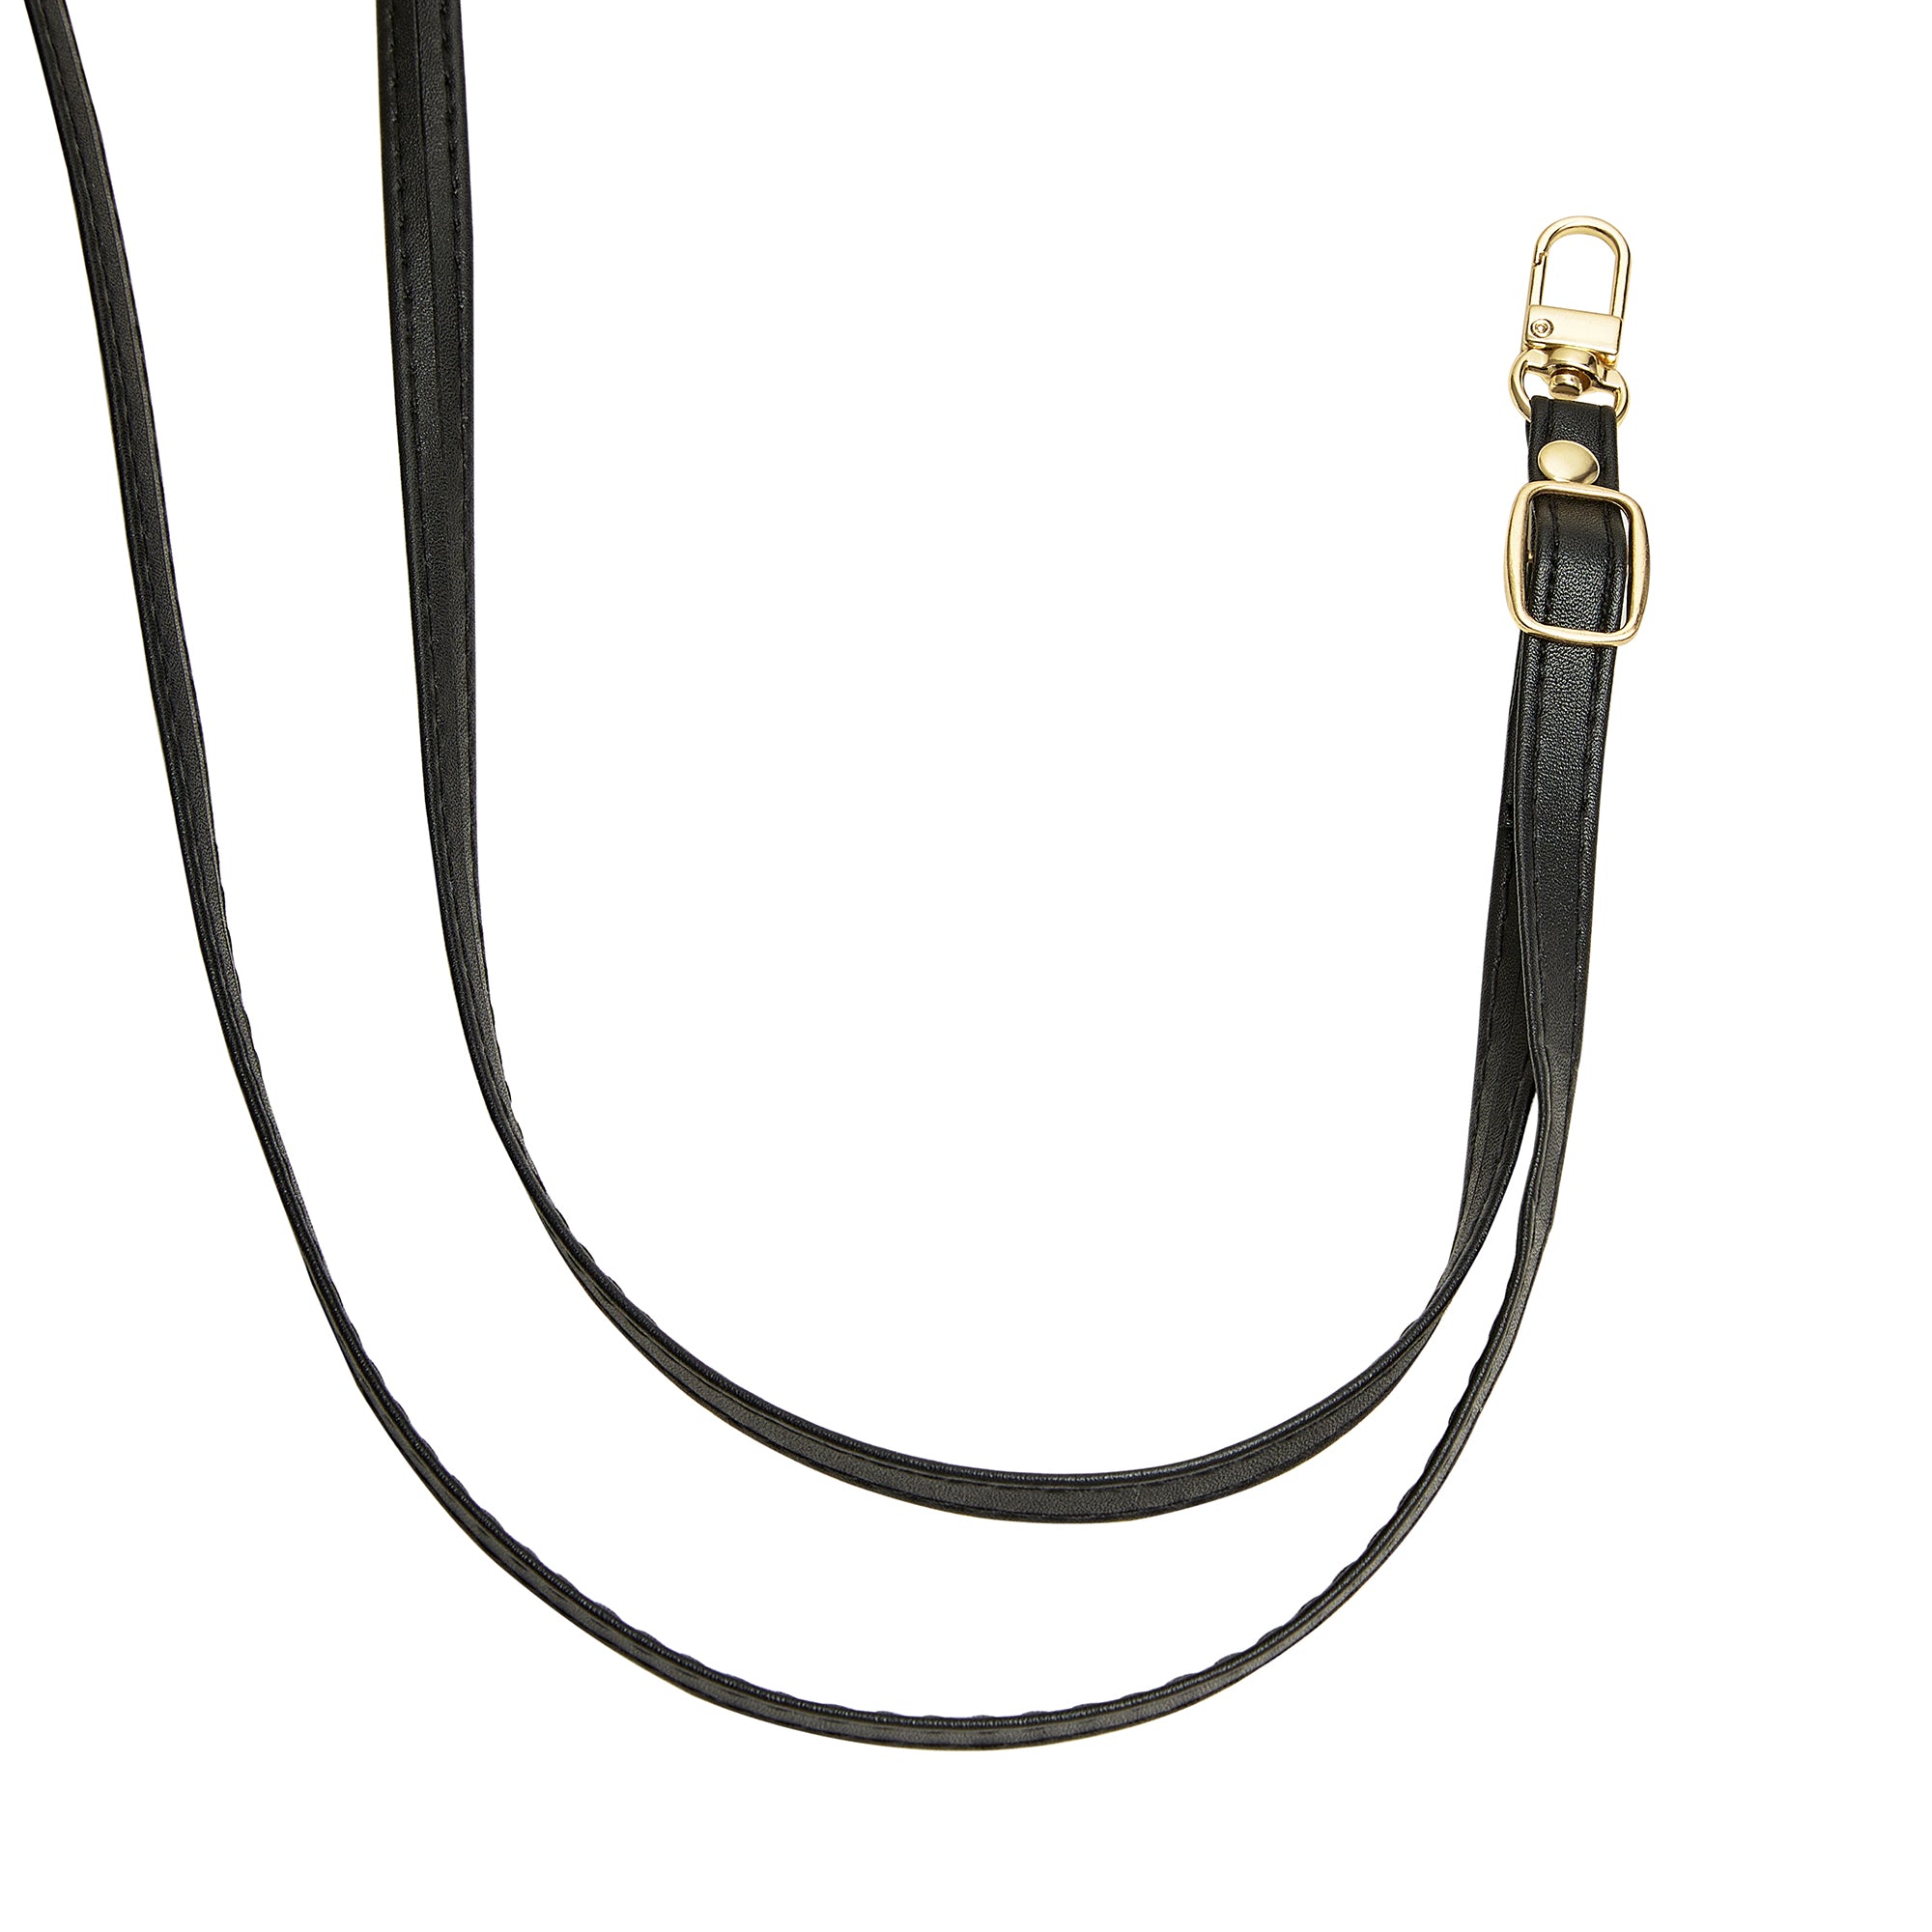 Adjustable leather and grosgain cross body strap black - CH